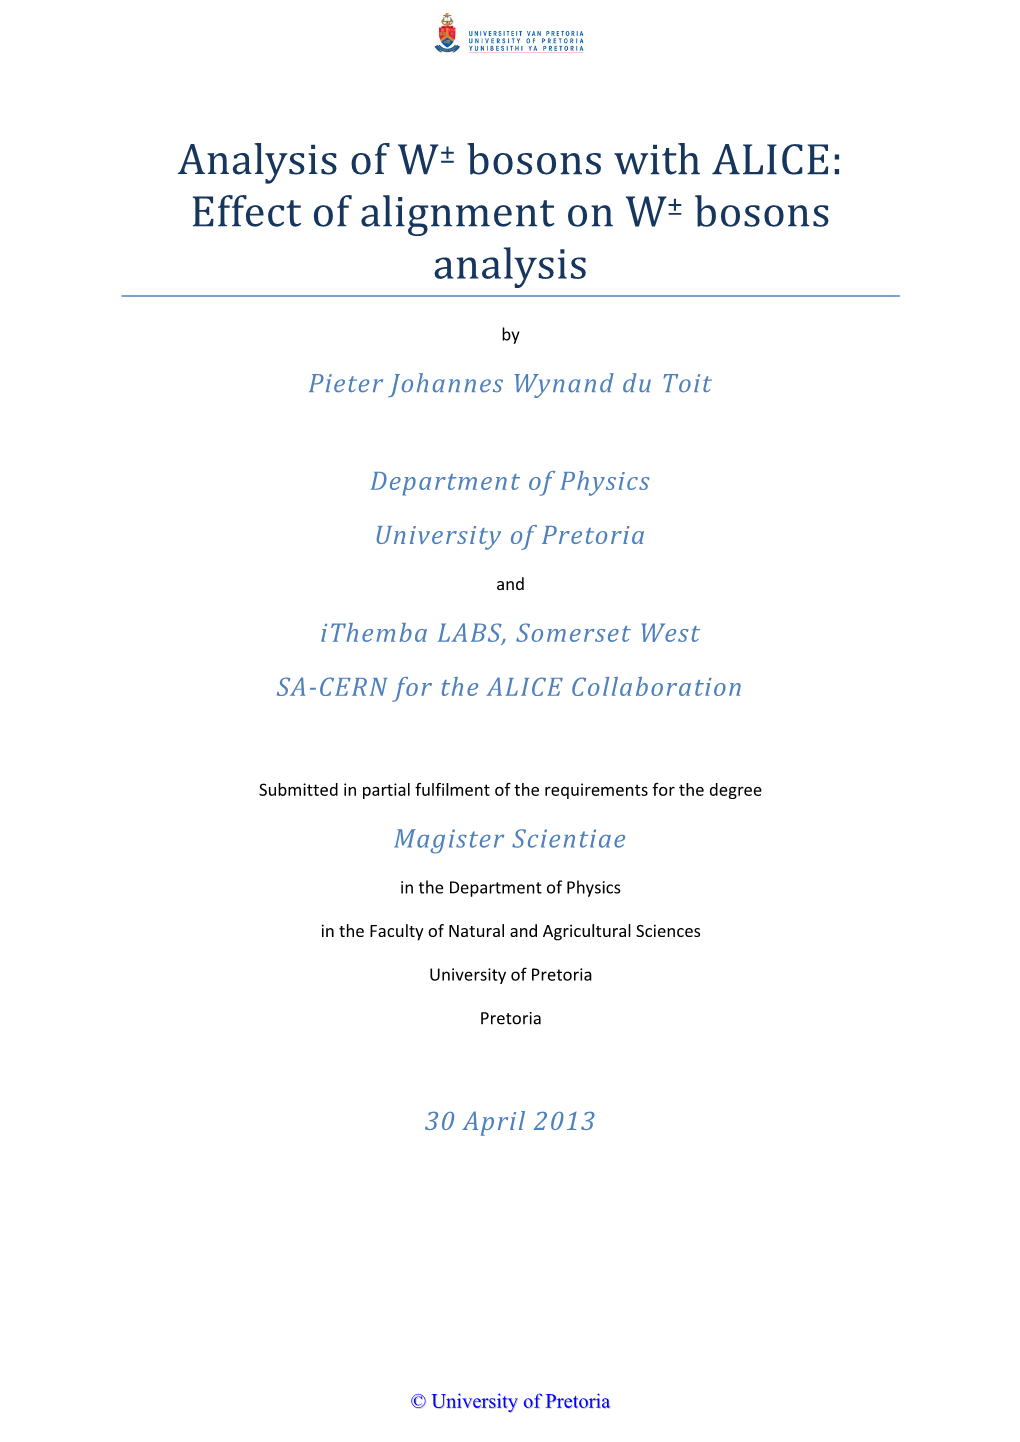 Analysis of W± Bosons with ALICE: Effect of Alignment on W± Bosons Analysis